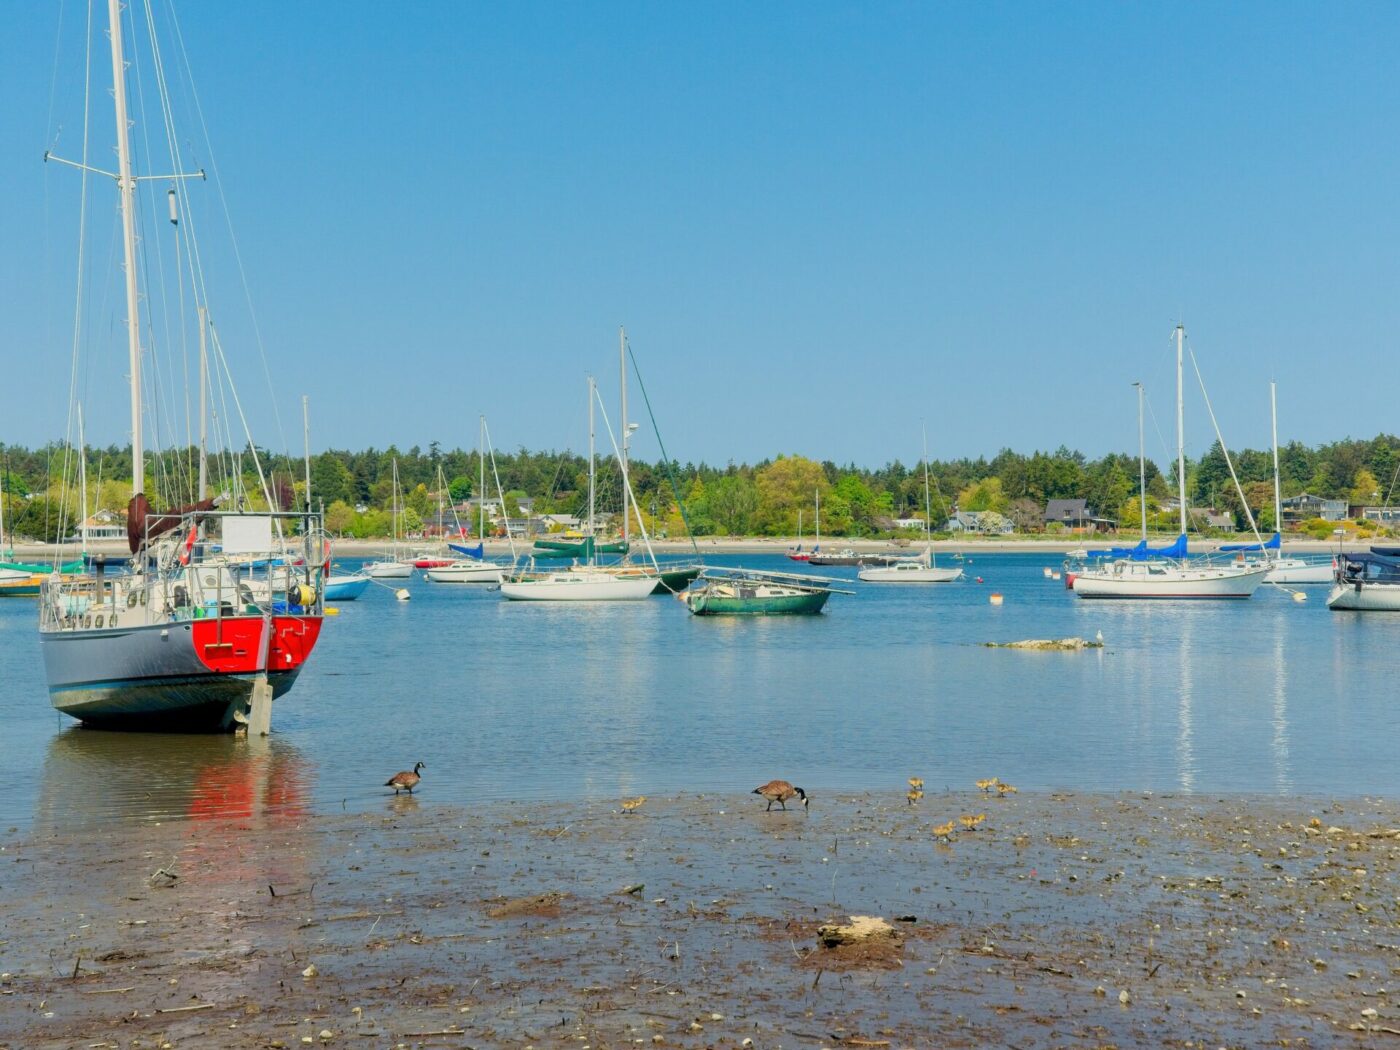 Cadboro Bay, like other popular anchorages, is often crowded with boats on moorings.